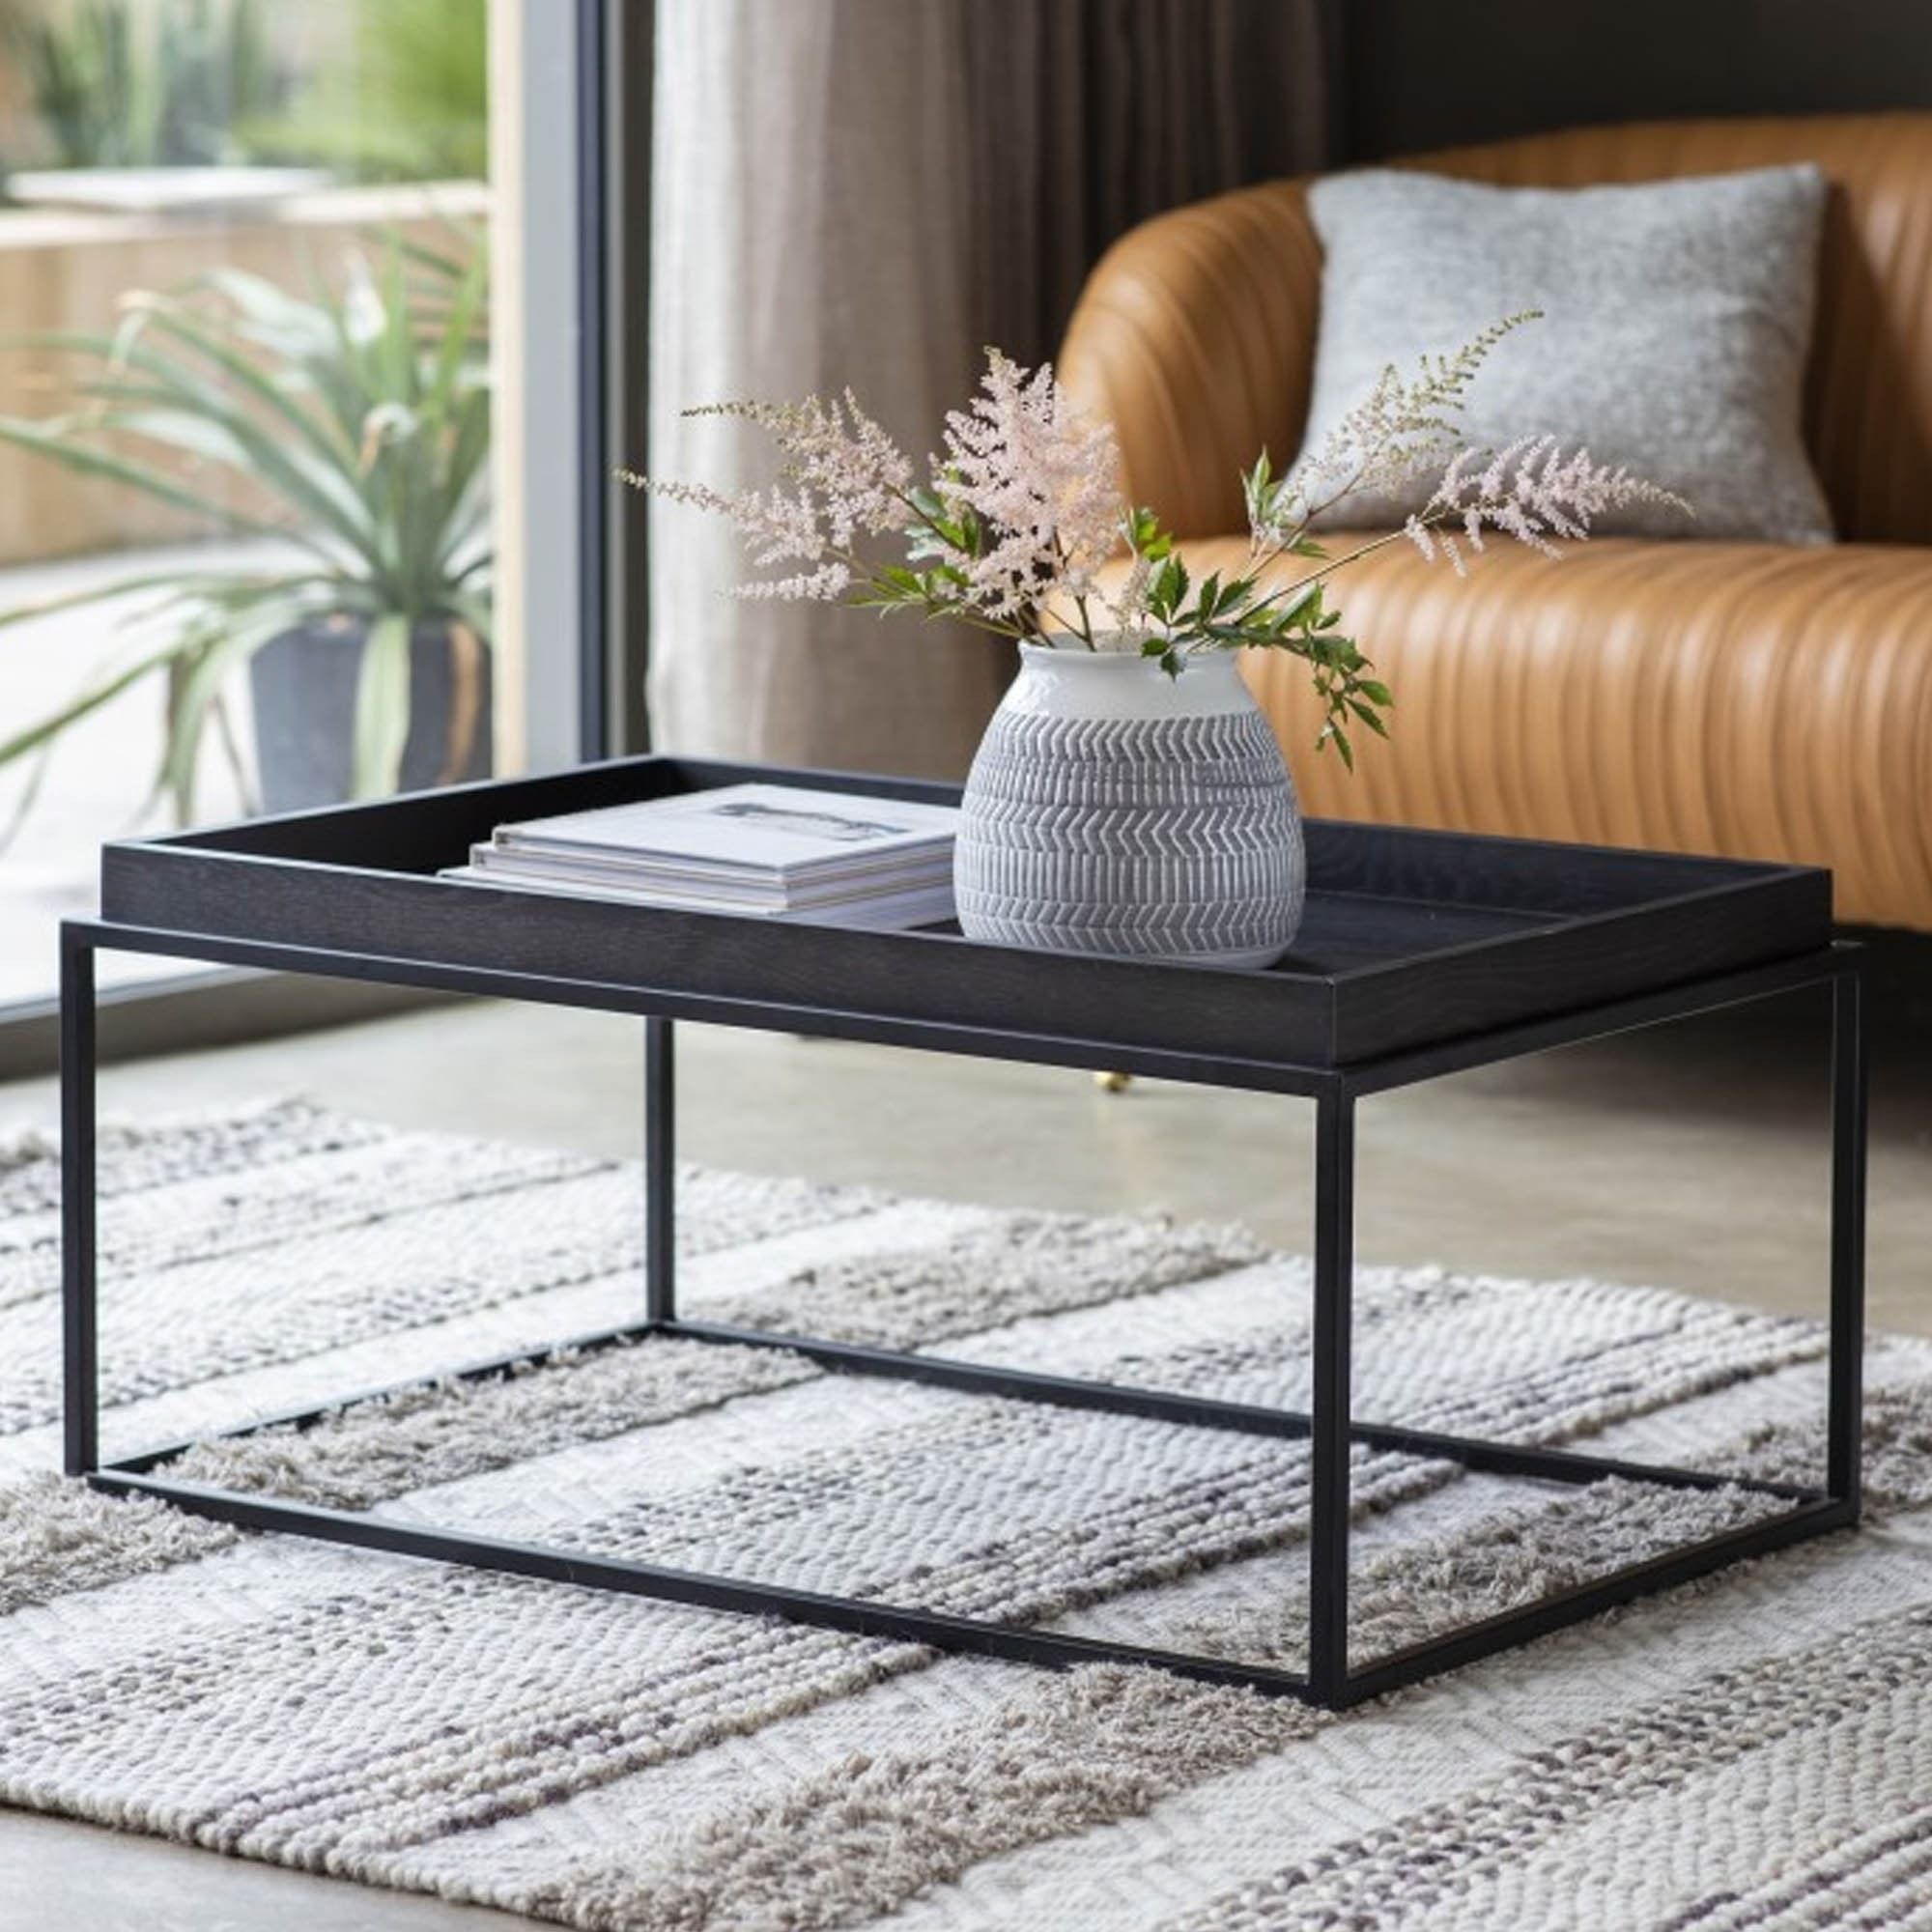 Forden Tray Coffee Table Black | Modern Coffee Table | Industrial With Regard To Coffee Tables With Trays (View 13 of 15)